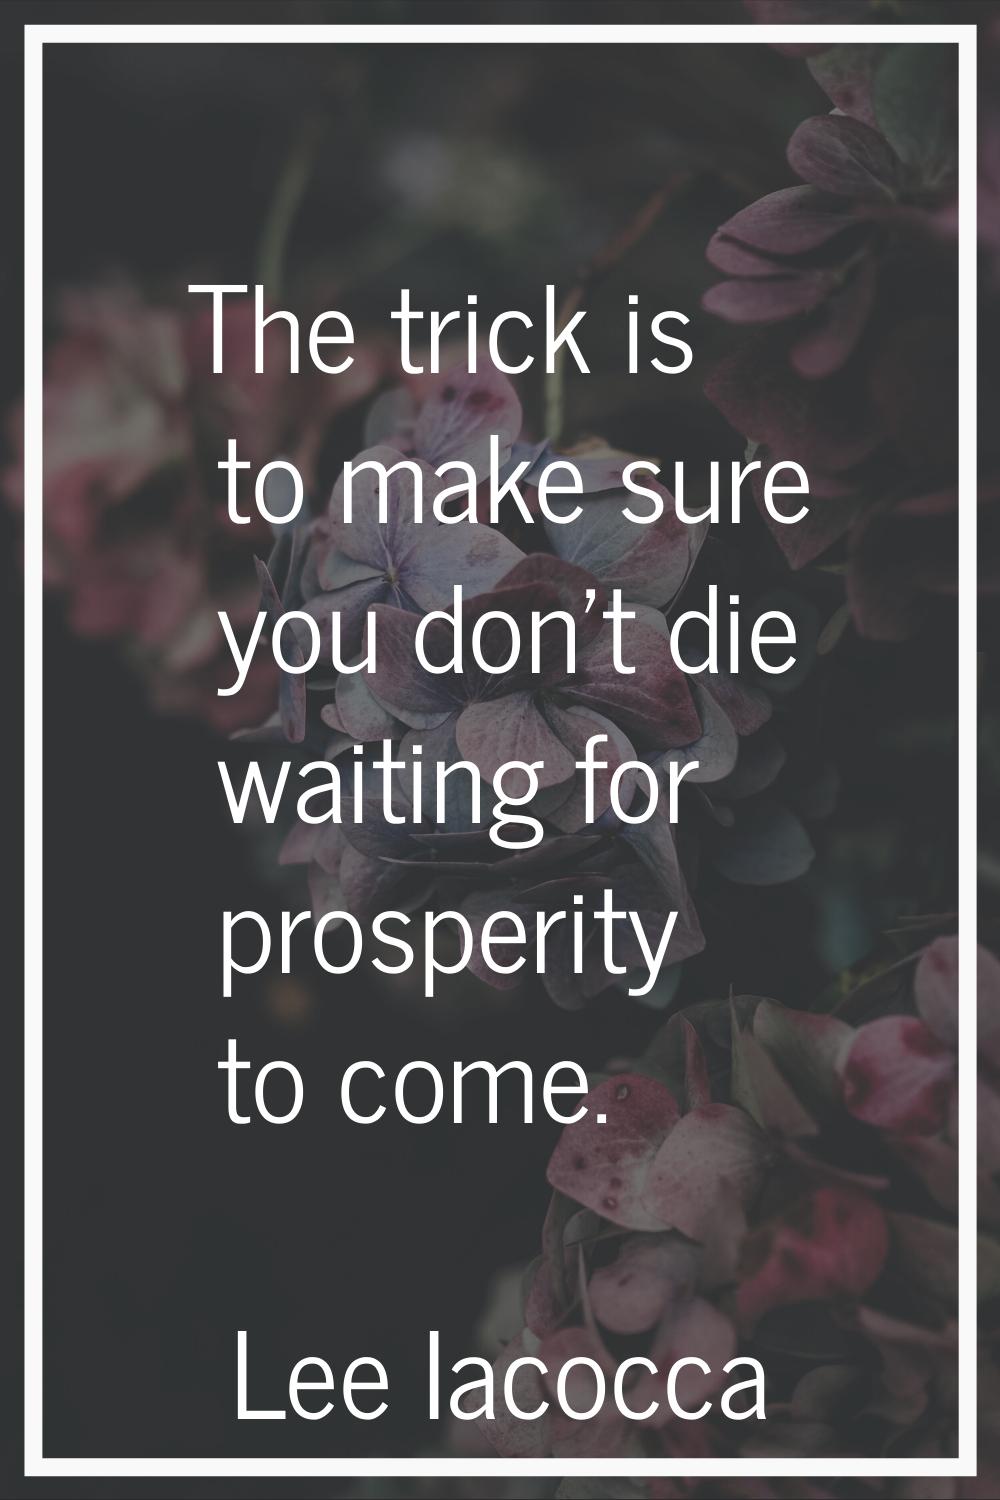 The trick is to make sure you don't die waiting for prosperity to come.